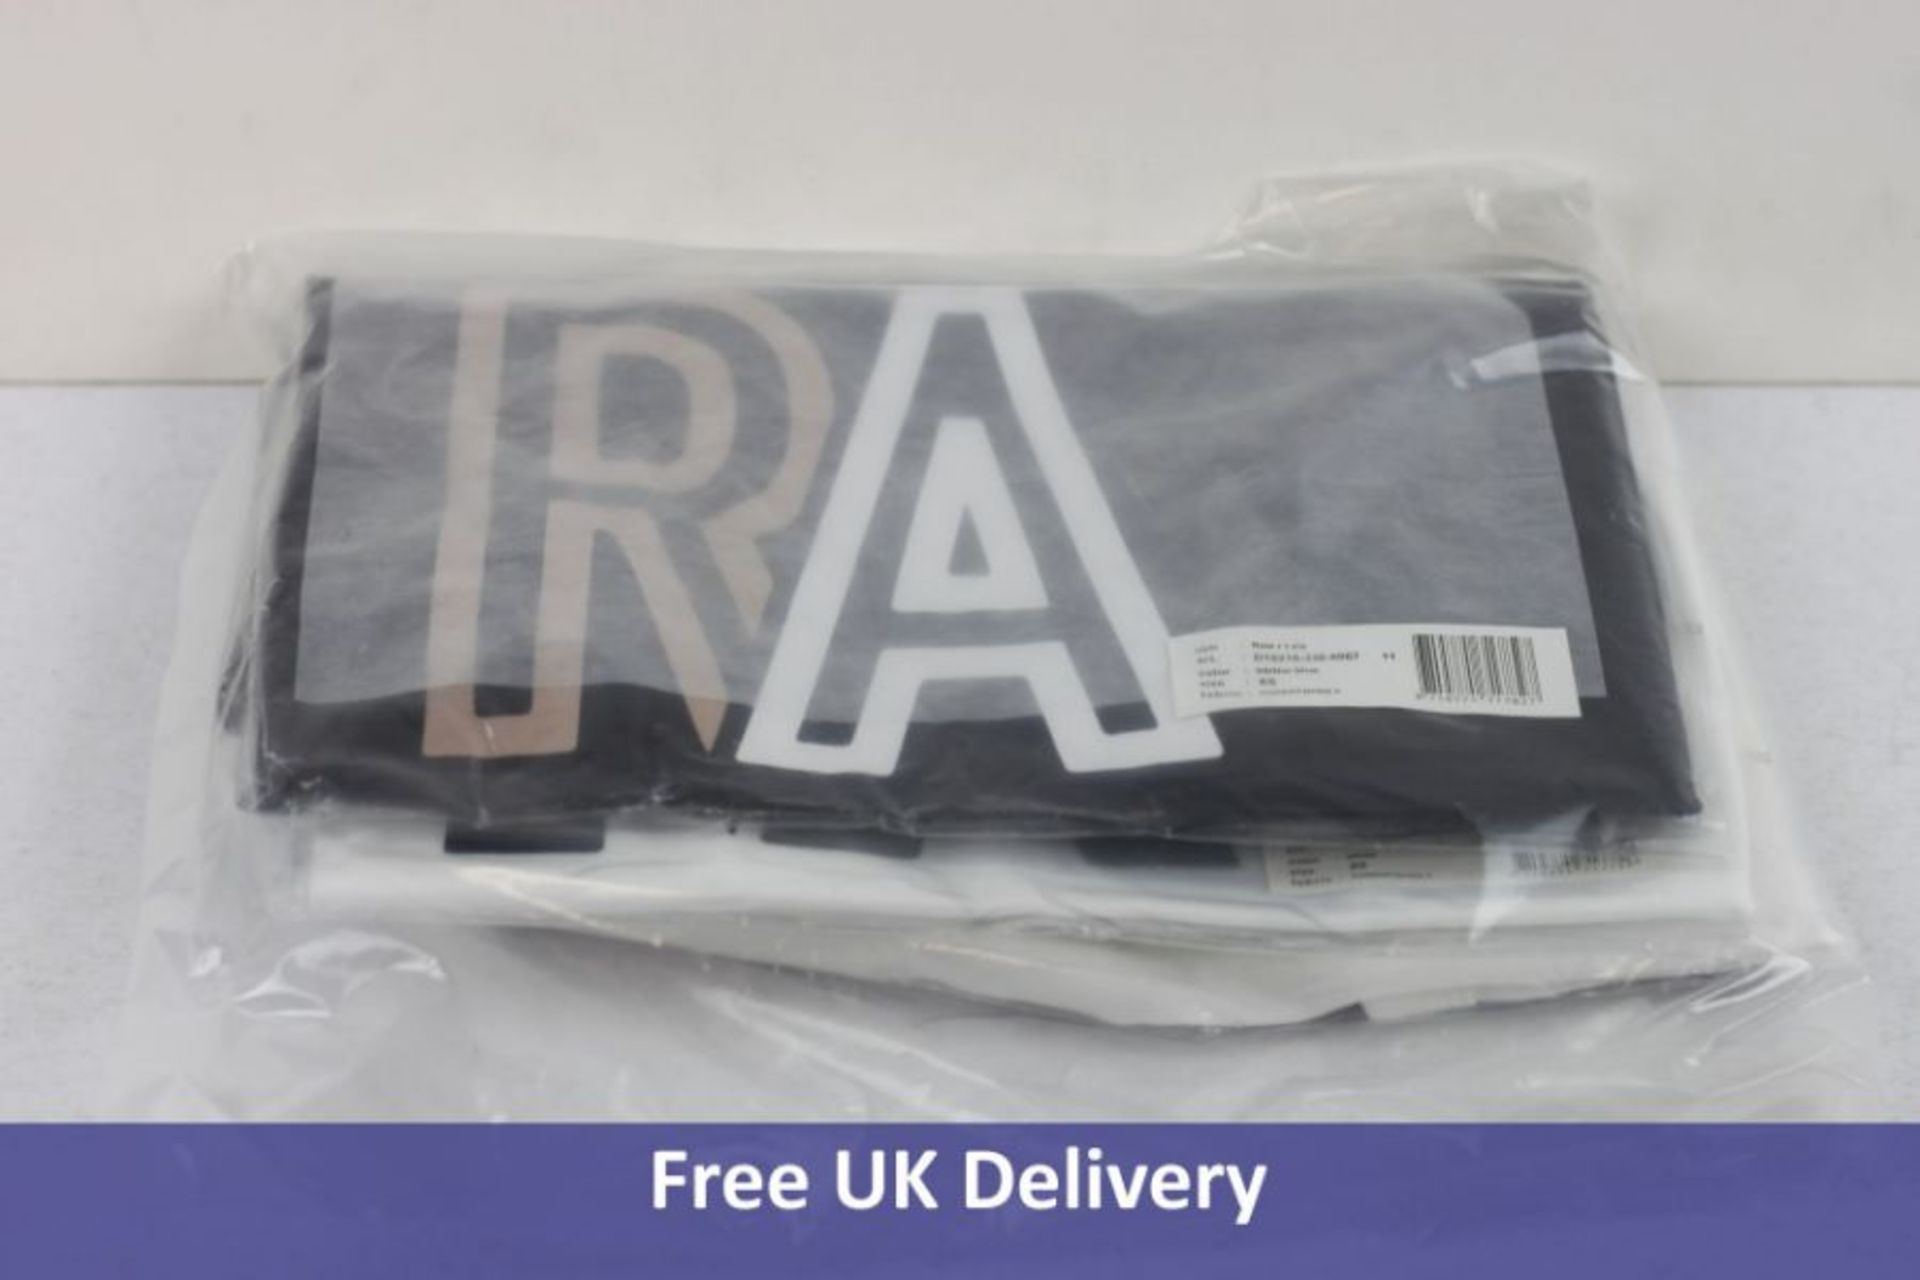 Two G- Star Raw Men's T-Shirts, 1x White and 1x Navy, Size XS